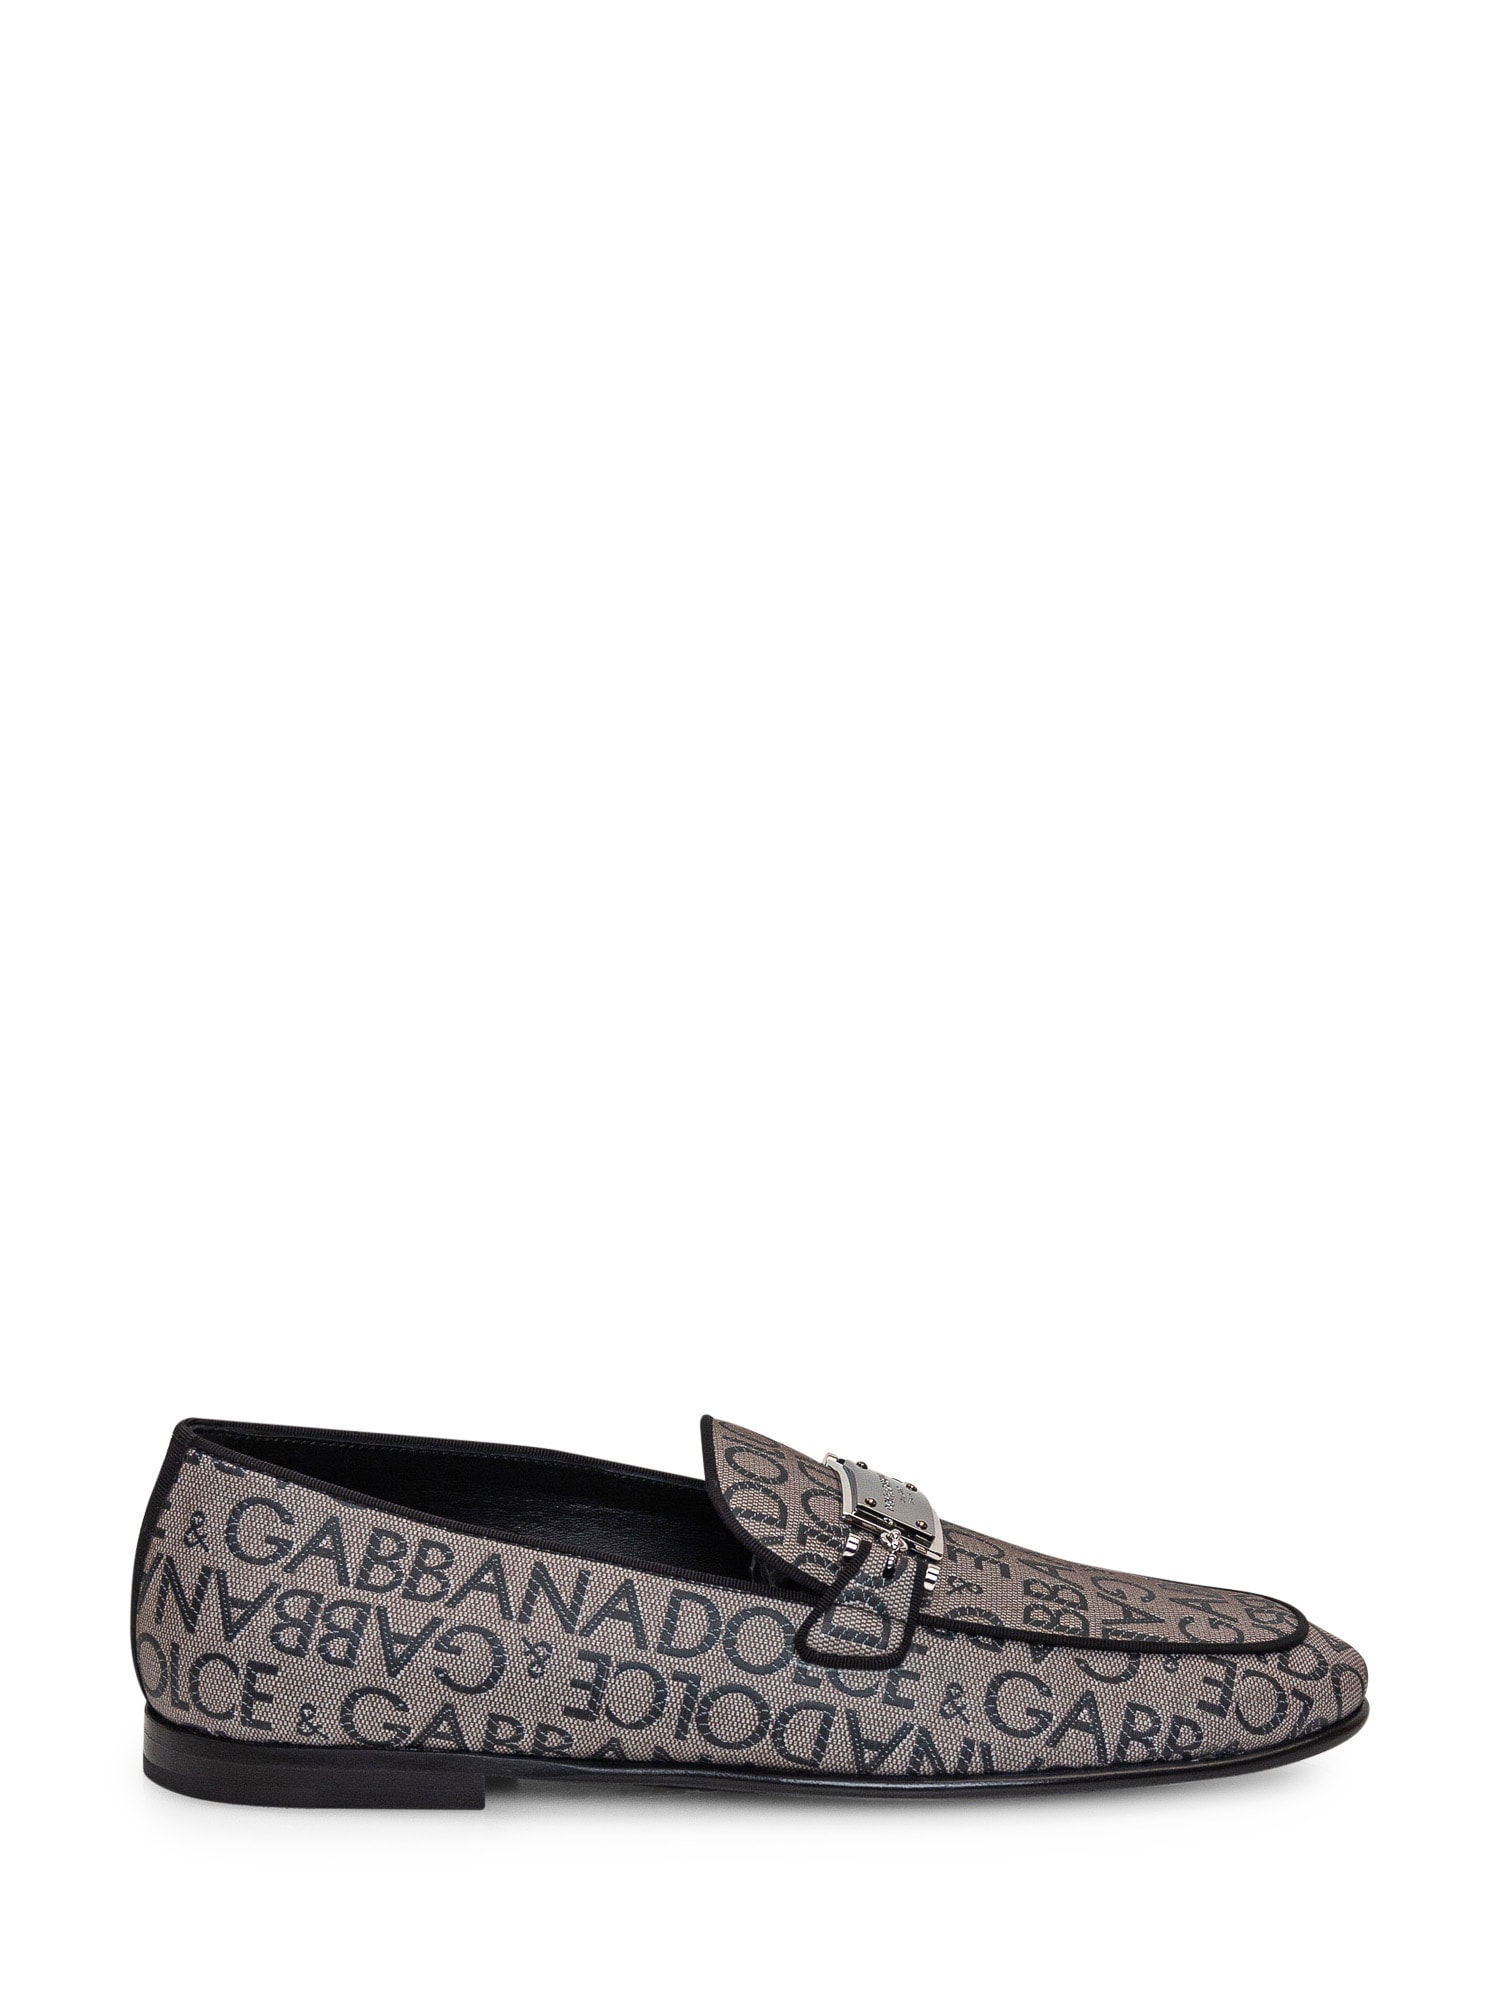 DOLCE & GABBANA LOAFER WITH LOGO